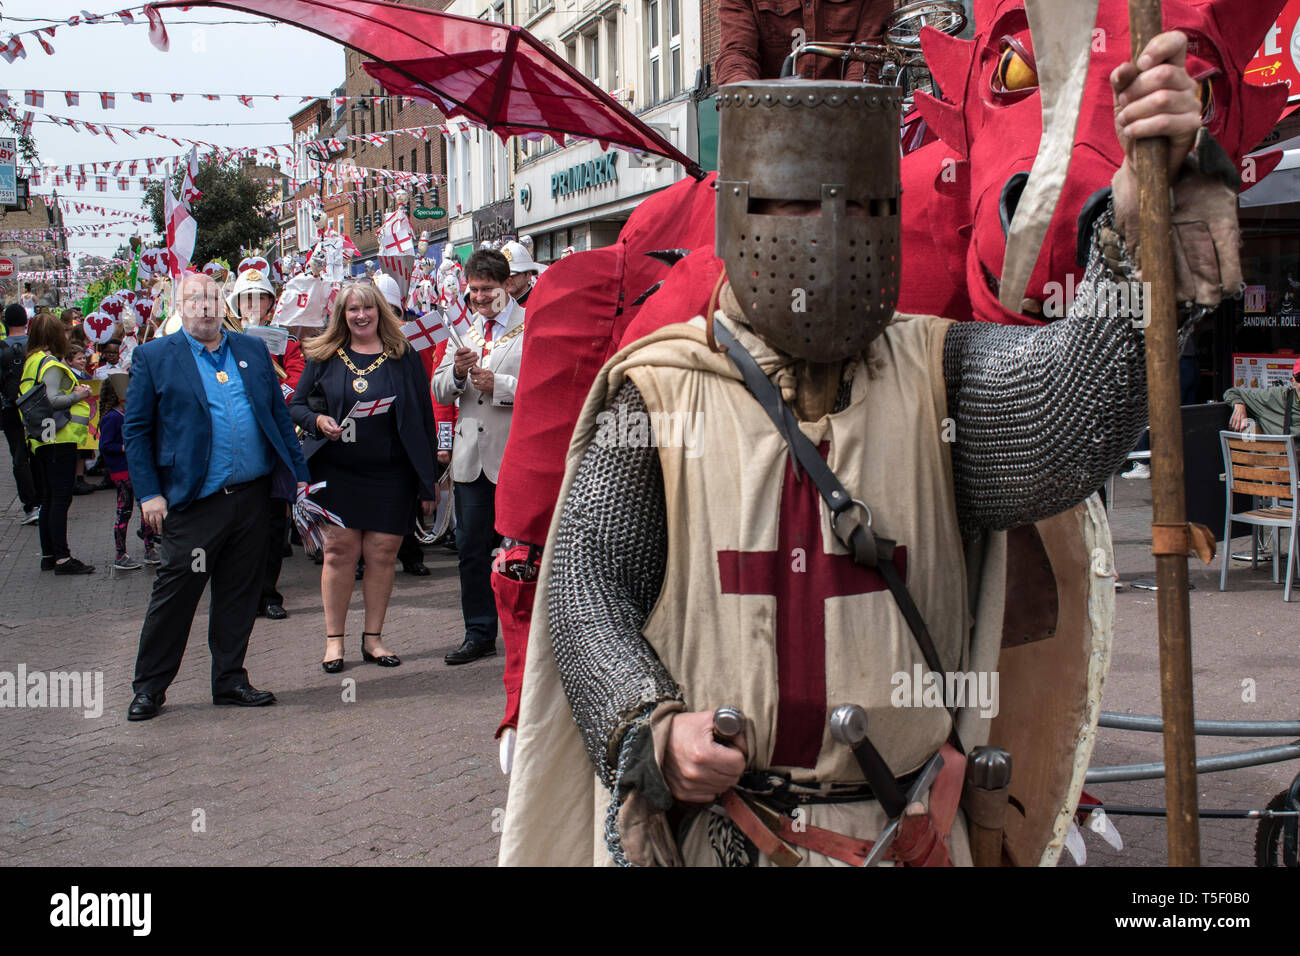 St Georges Day 23rd April 2019, Dartford Kent, parade through the town centre high street, Councillor David Mote and town hall dignitaries. 2010s HOMER SYKES Stock Photo